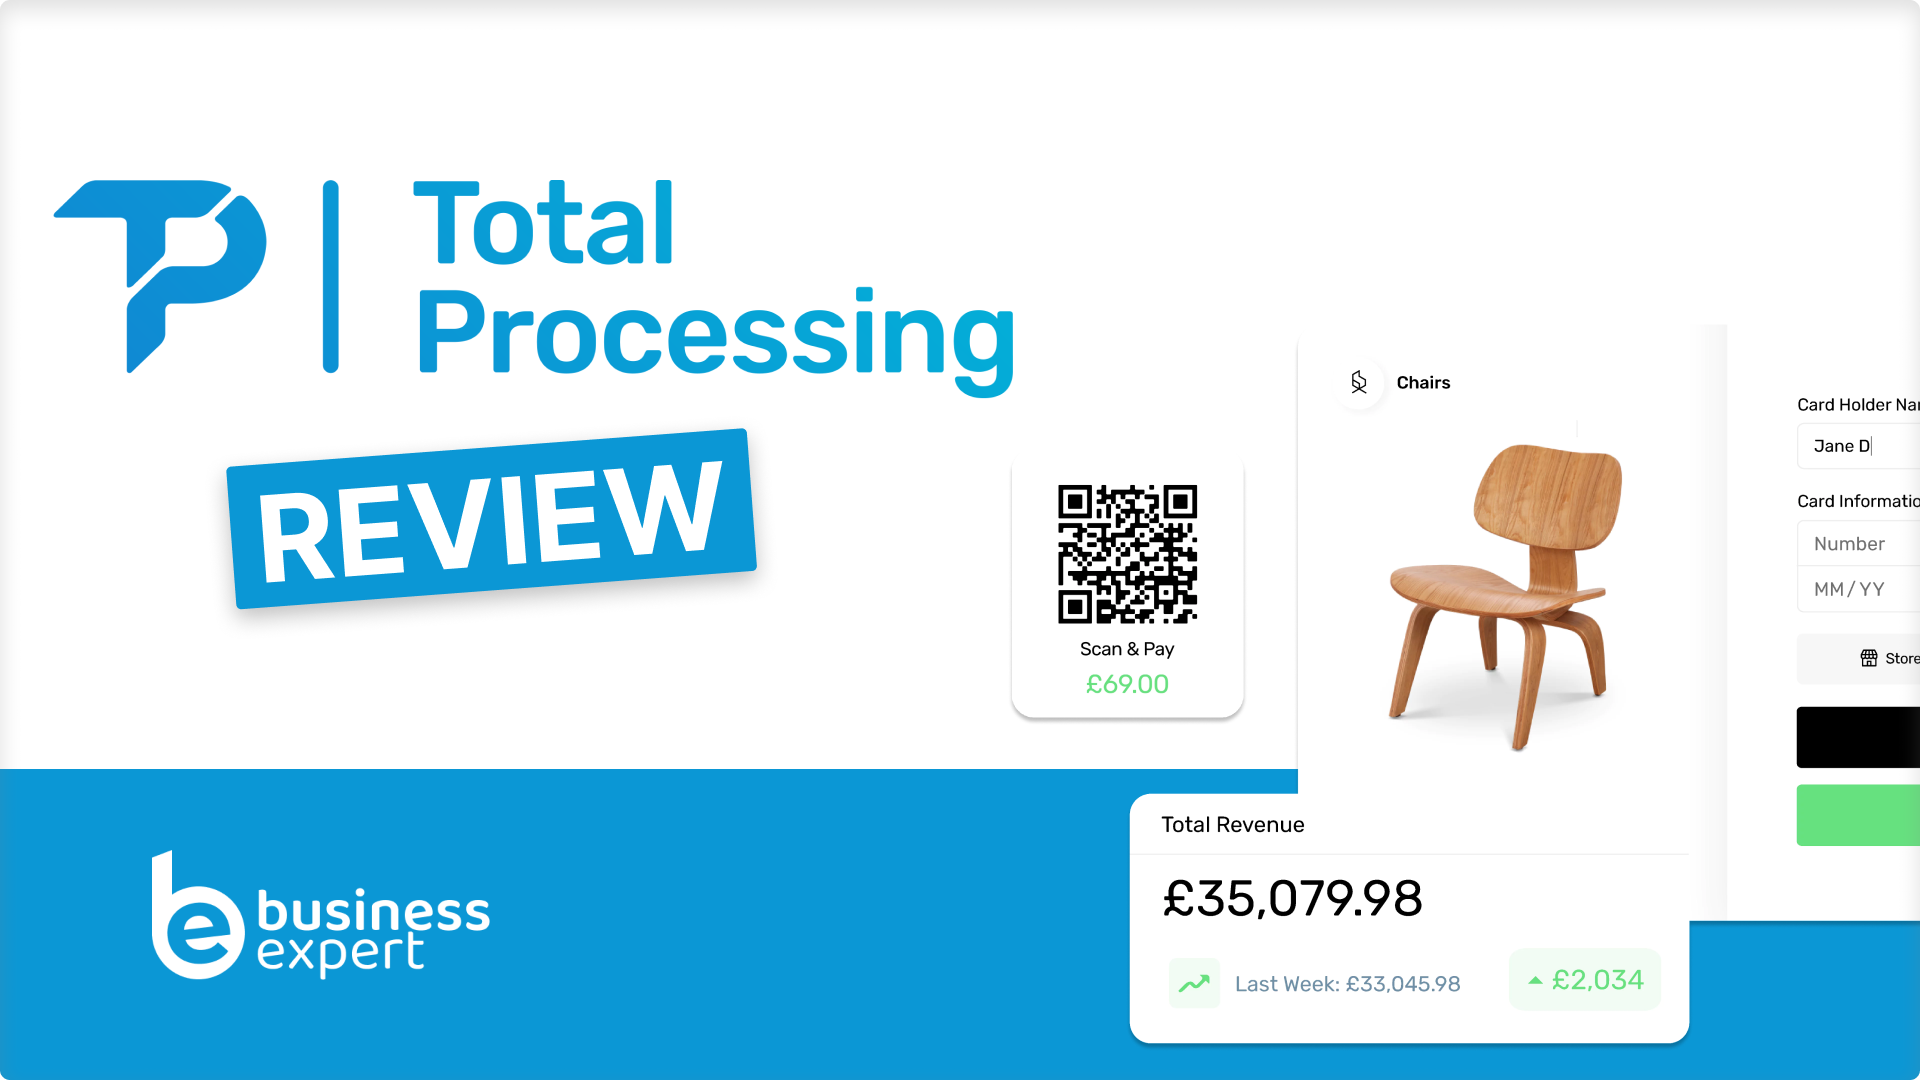 Total Processing Review
